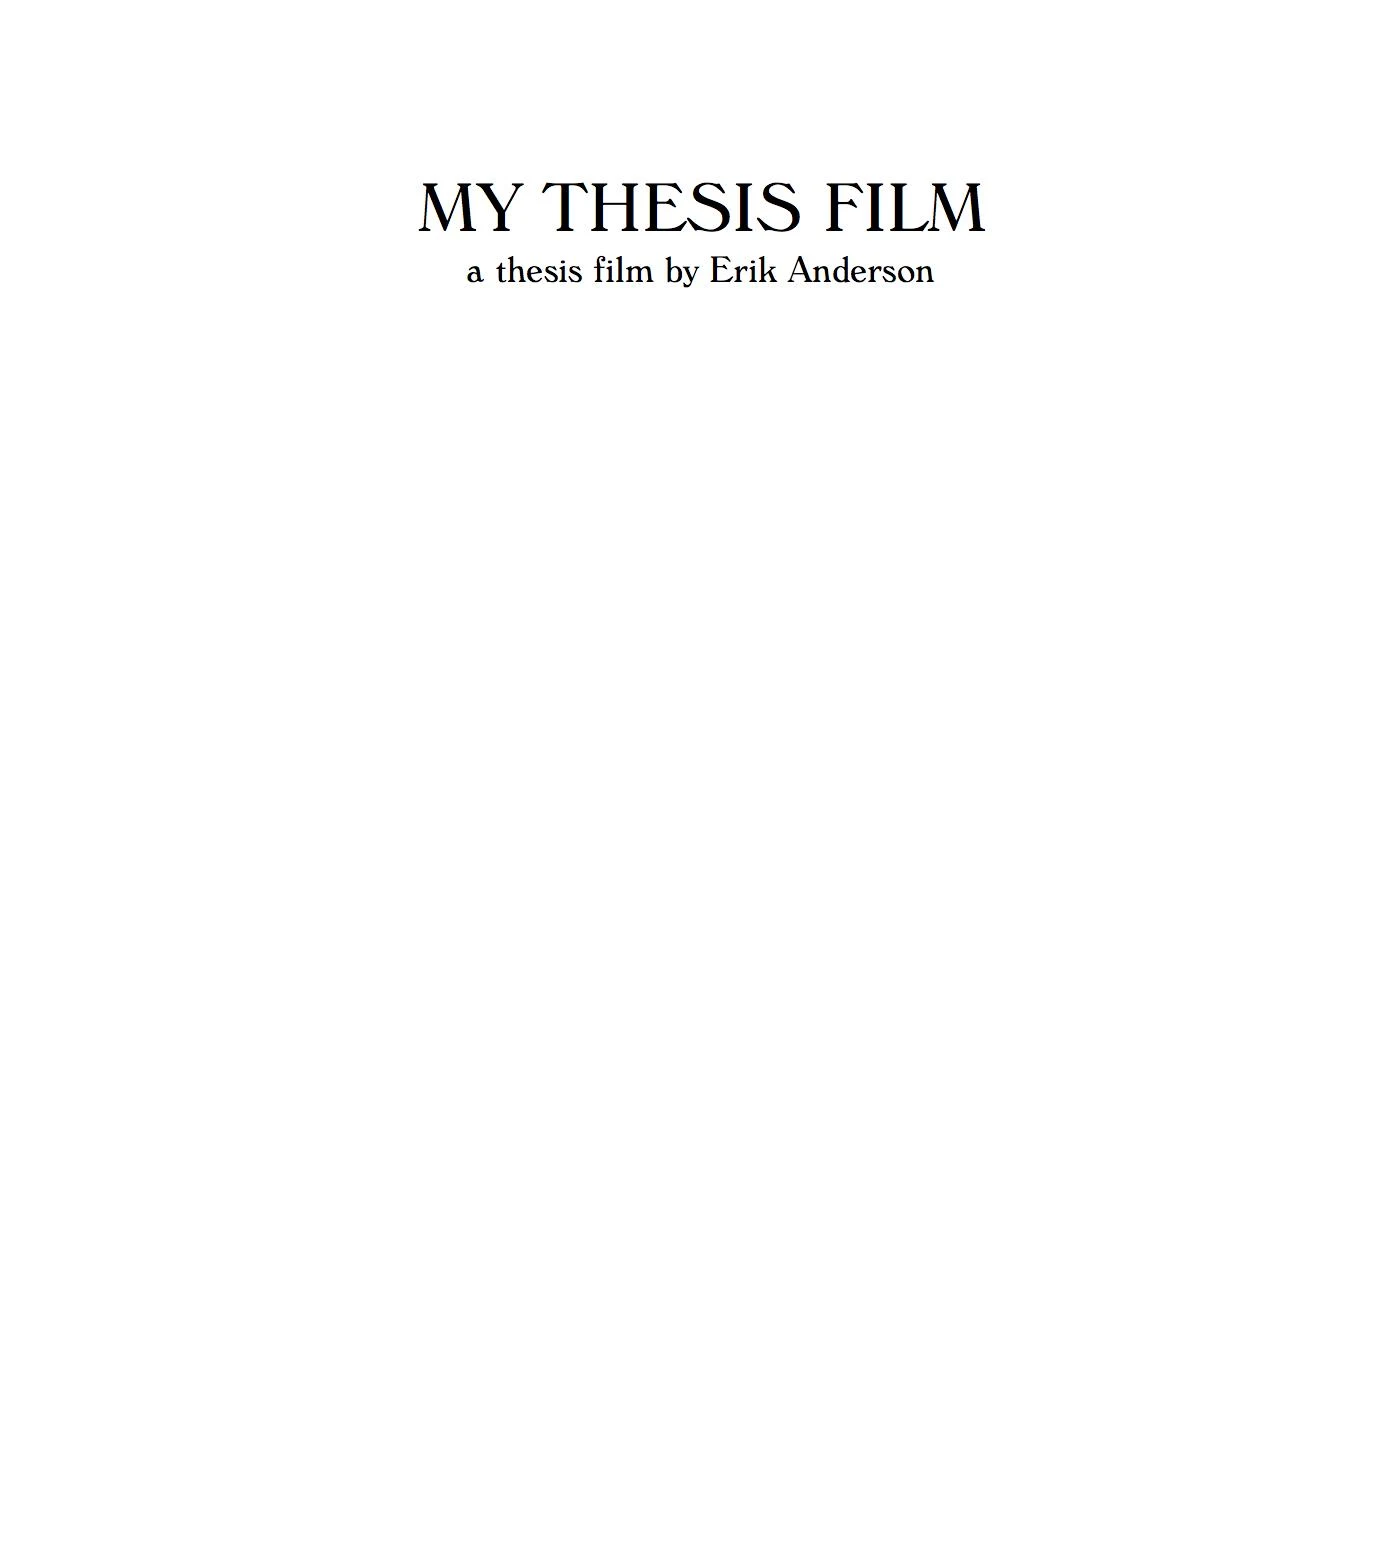 My Thesis Film: A Thesis Film by Erik Anderson